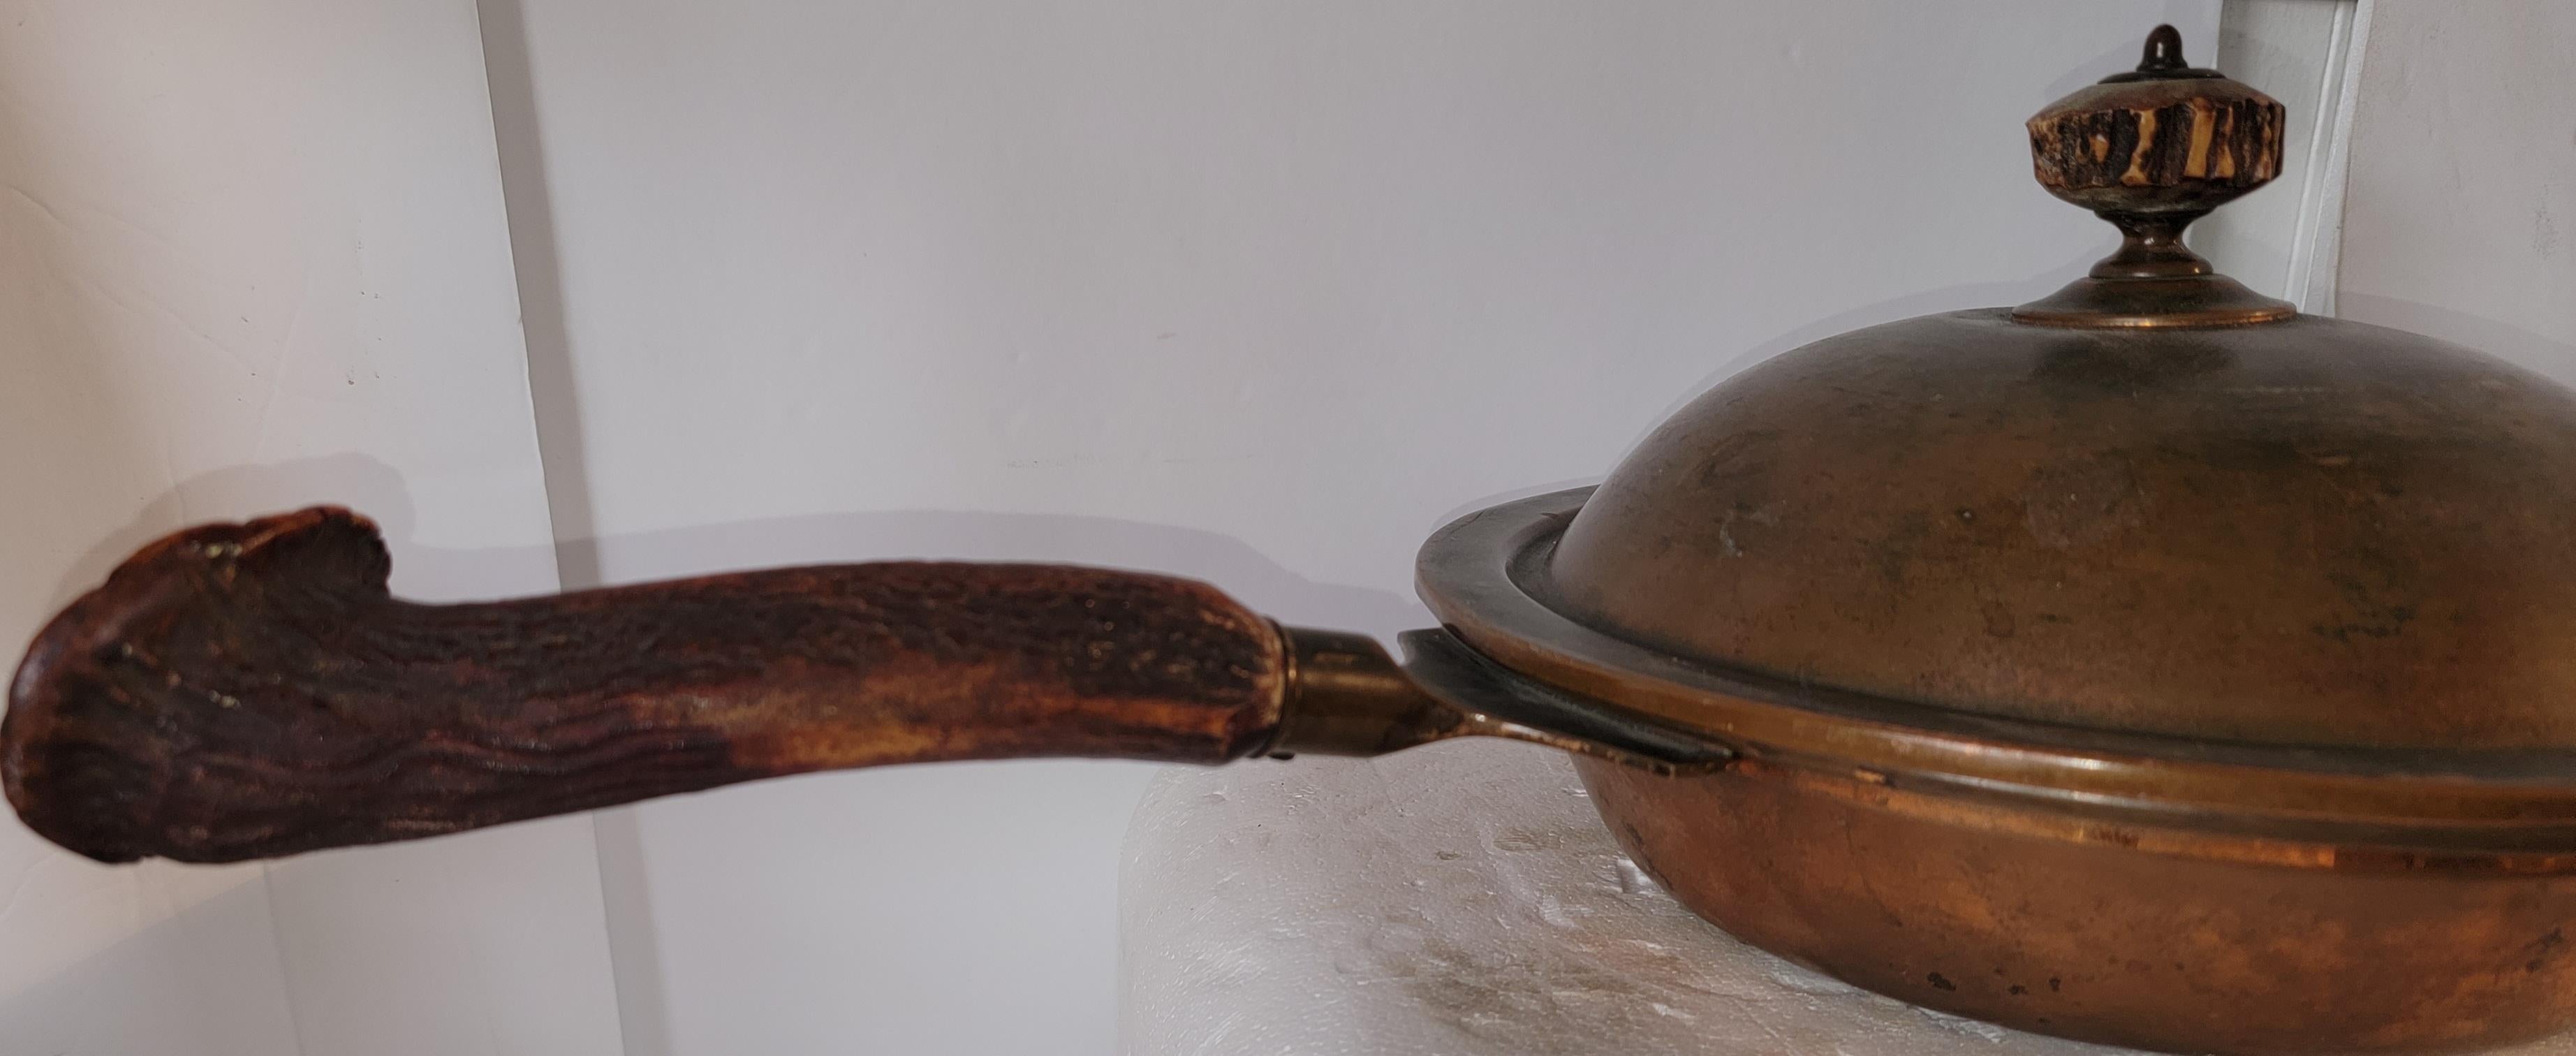 Antique Copper Frying Pan with Deer Antler Handles In Good Condition For Sale In Los Angeles, CA